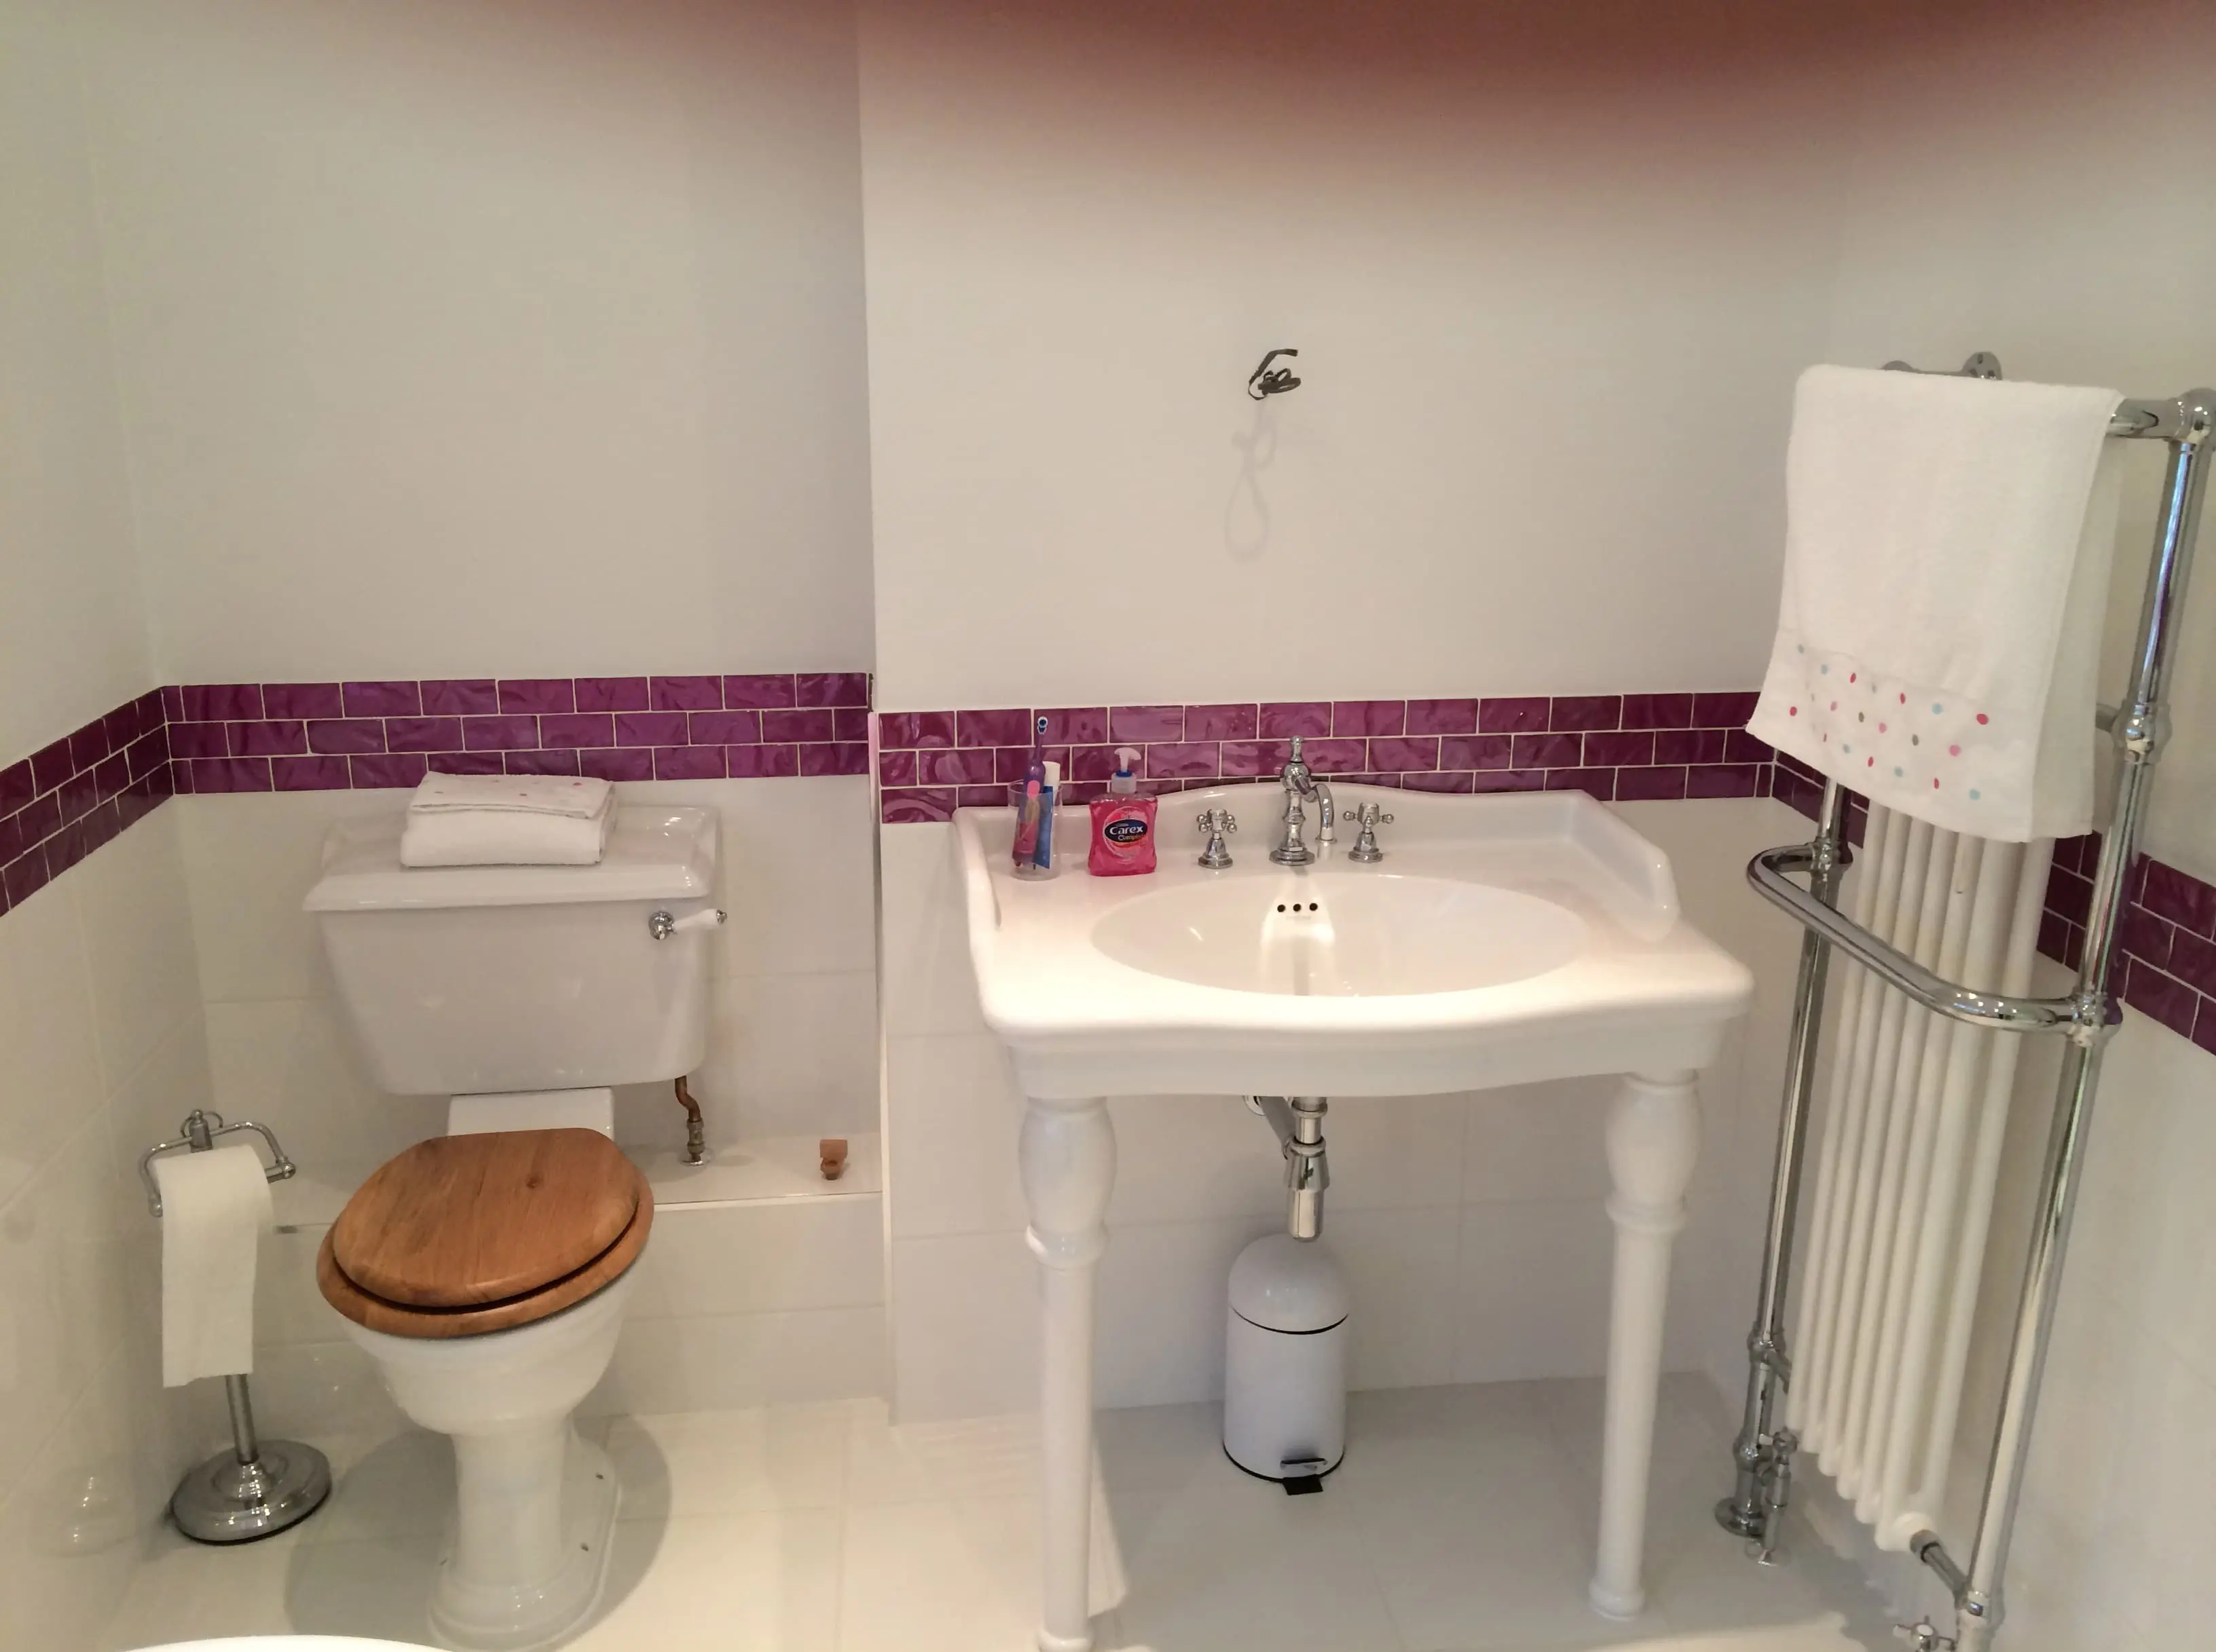 At Plumbing 4 U, we can tailor our tiling services&nbsp;to suit your budget.The team are fully qualified, with over 40 years of experience in the tiling industry, so you can be sure you are in good hands.&nbsp;In addition to tiling, we also offer plumbing and&nbsp;bathroom&nbsp;installations.Why not give us a&nbsp;call today to discuss your requirements for&nbsp;tiling services in Tilehurst?